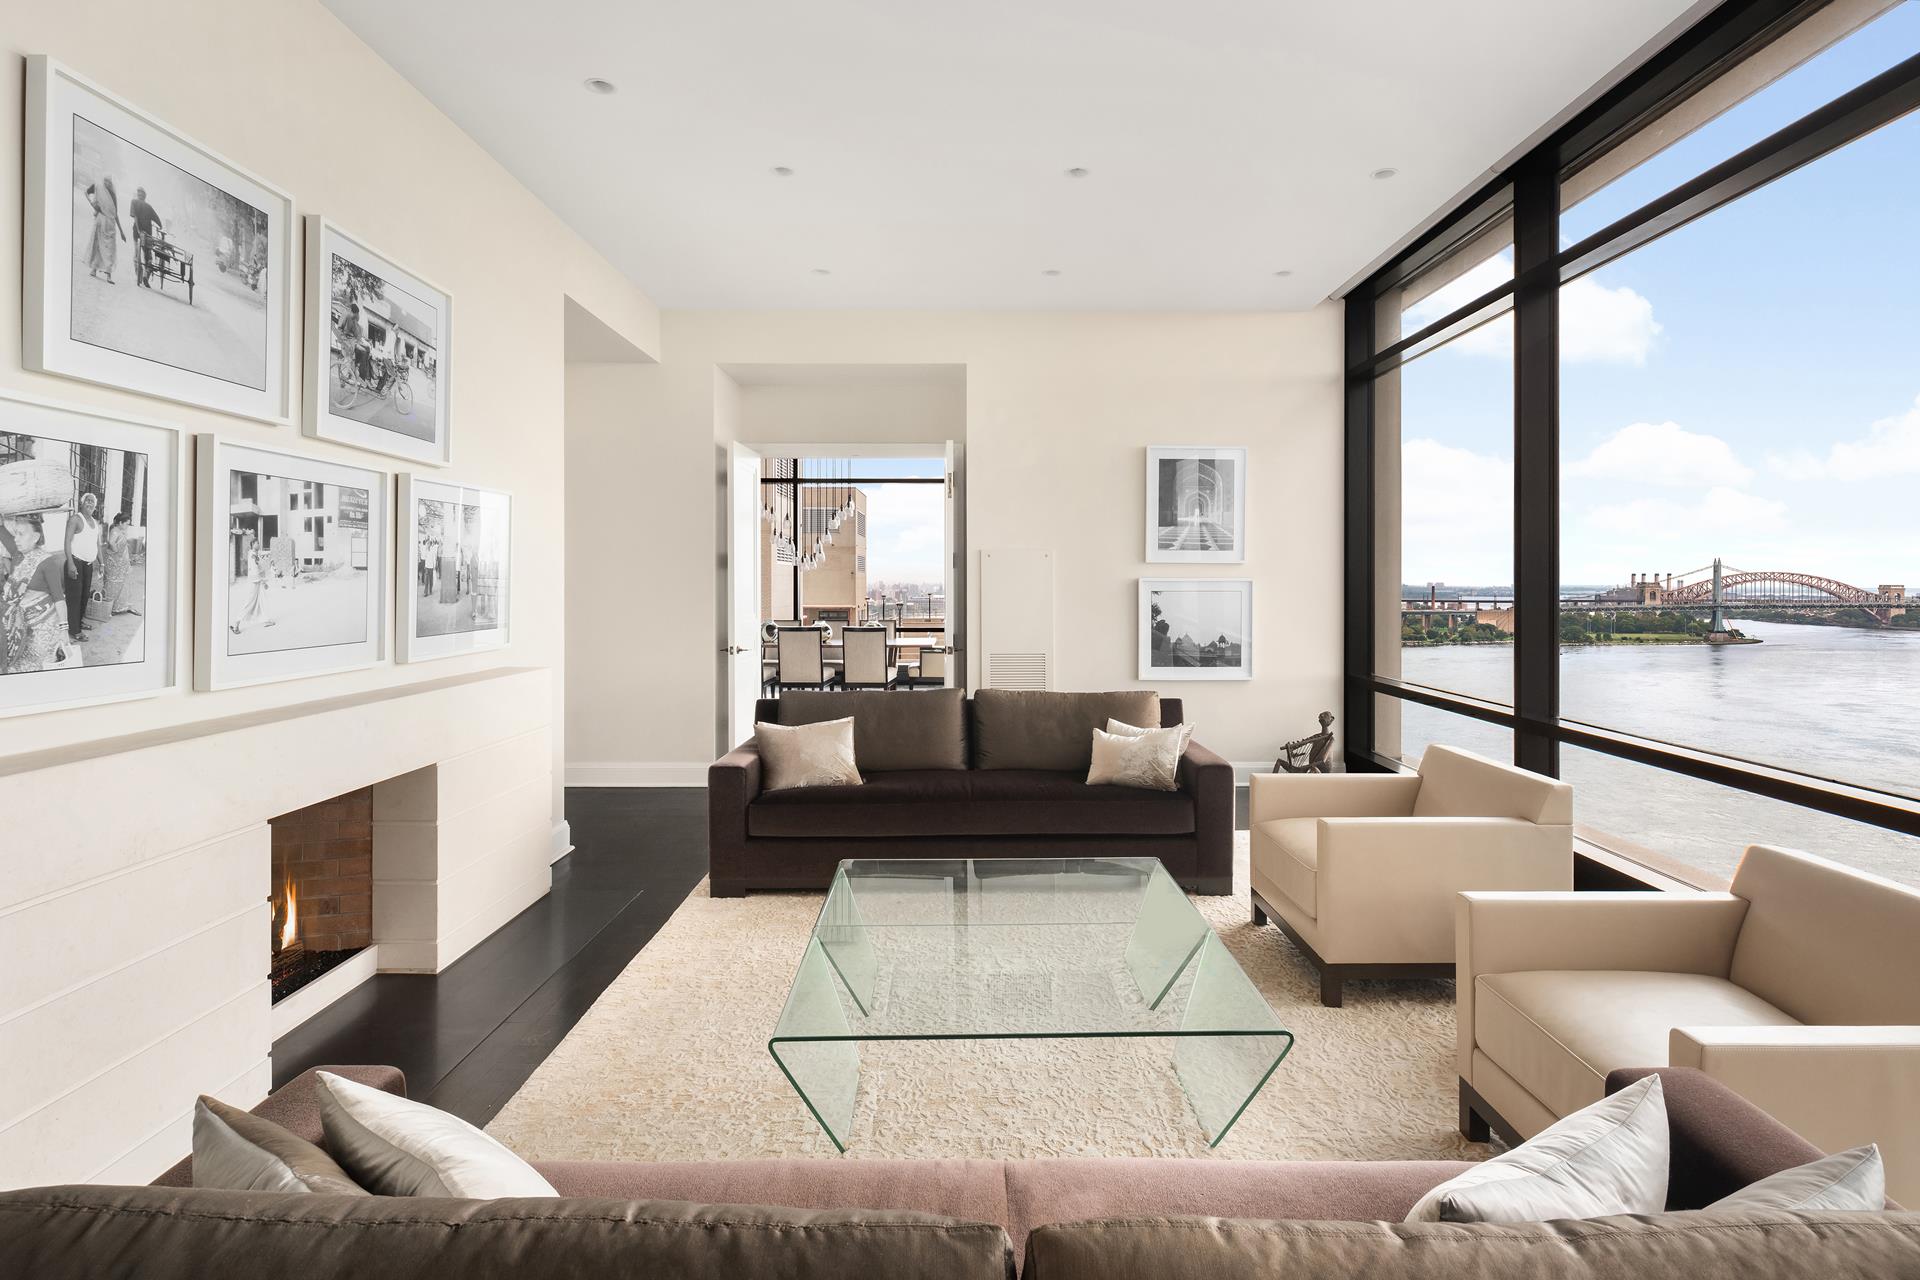 170 East End Avenue Ph2b, Yorkville, Upper East Side, NYC - 5 Bedrooms  
6.5 Bathrooms  
9 Rooms - 